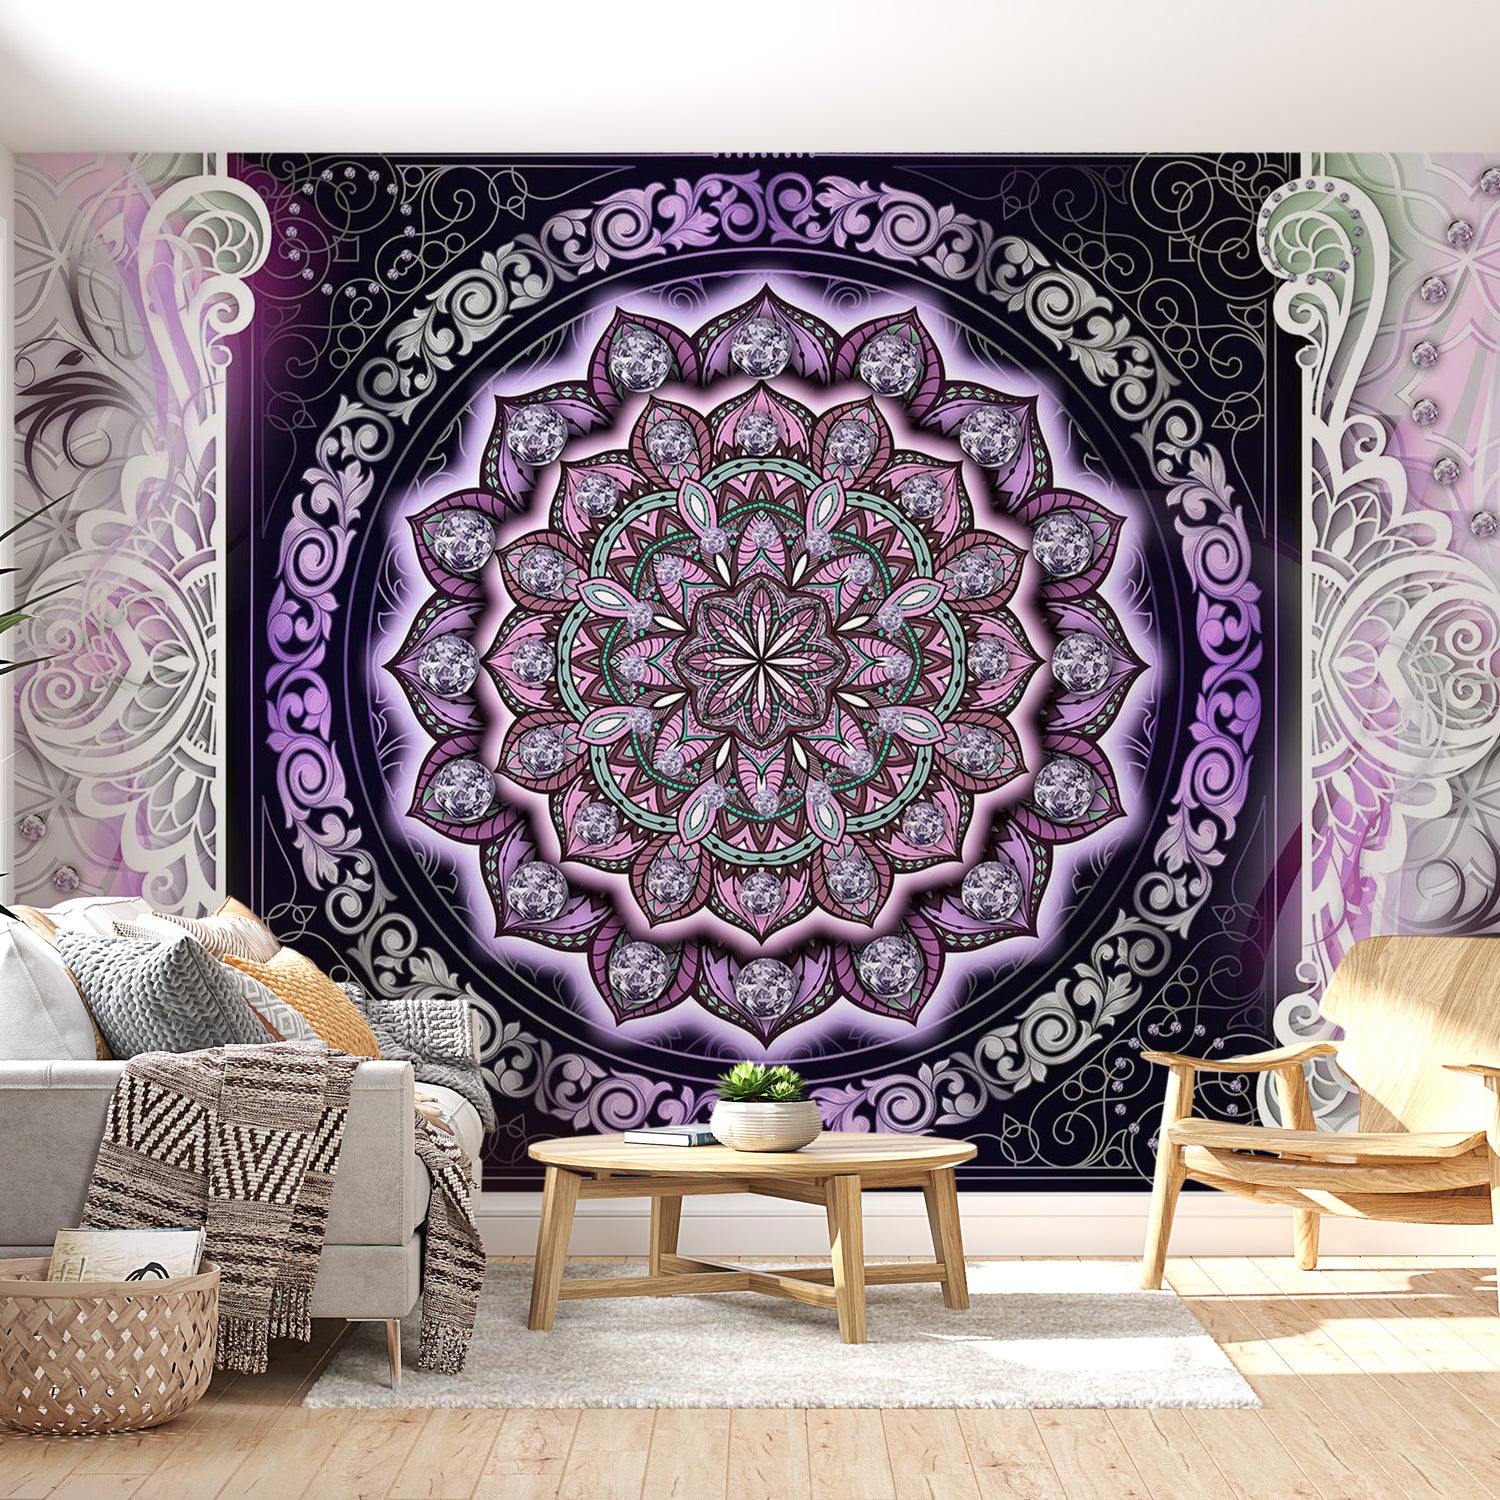 Peel & Stick Mandala Wall Mural - Stained Glass Mandala - Removable Wall Decals